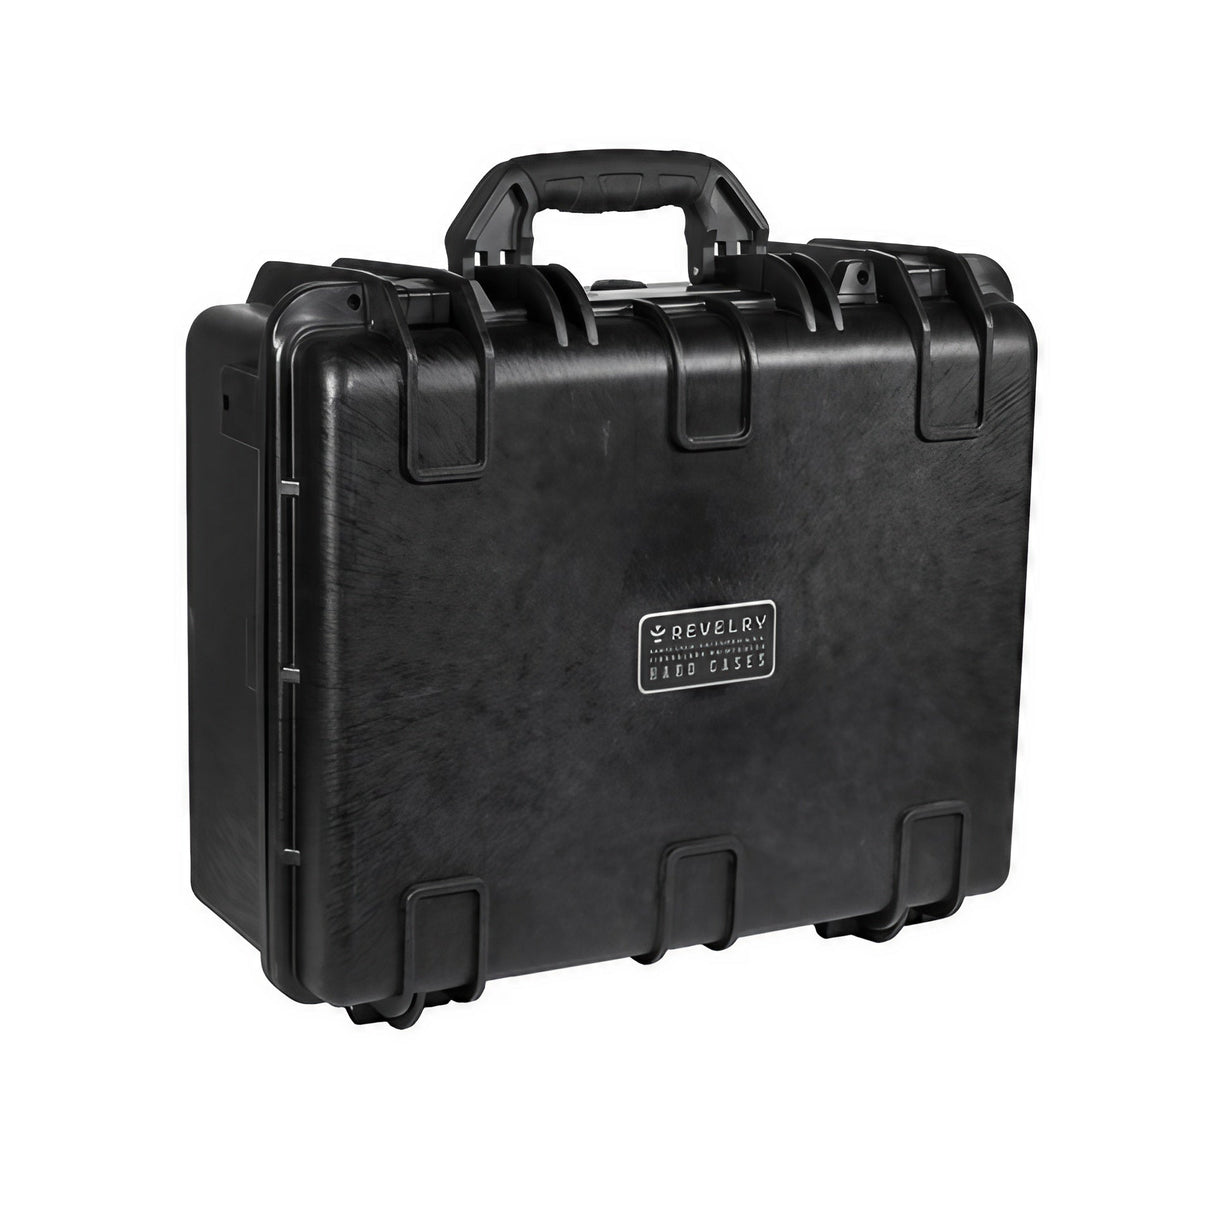 Revelry Supply The Scout Hard Case 17 front view, durable black silicone exterior with handle